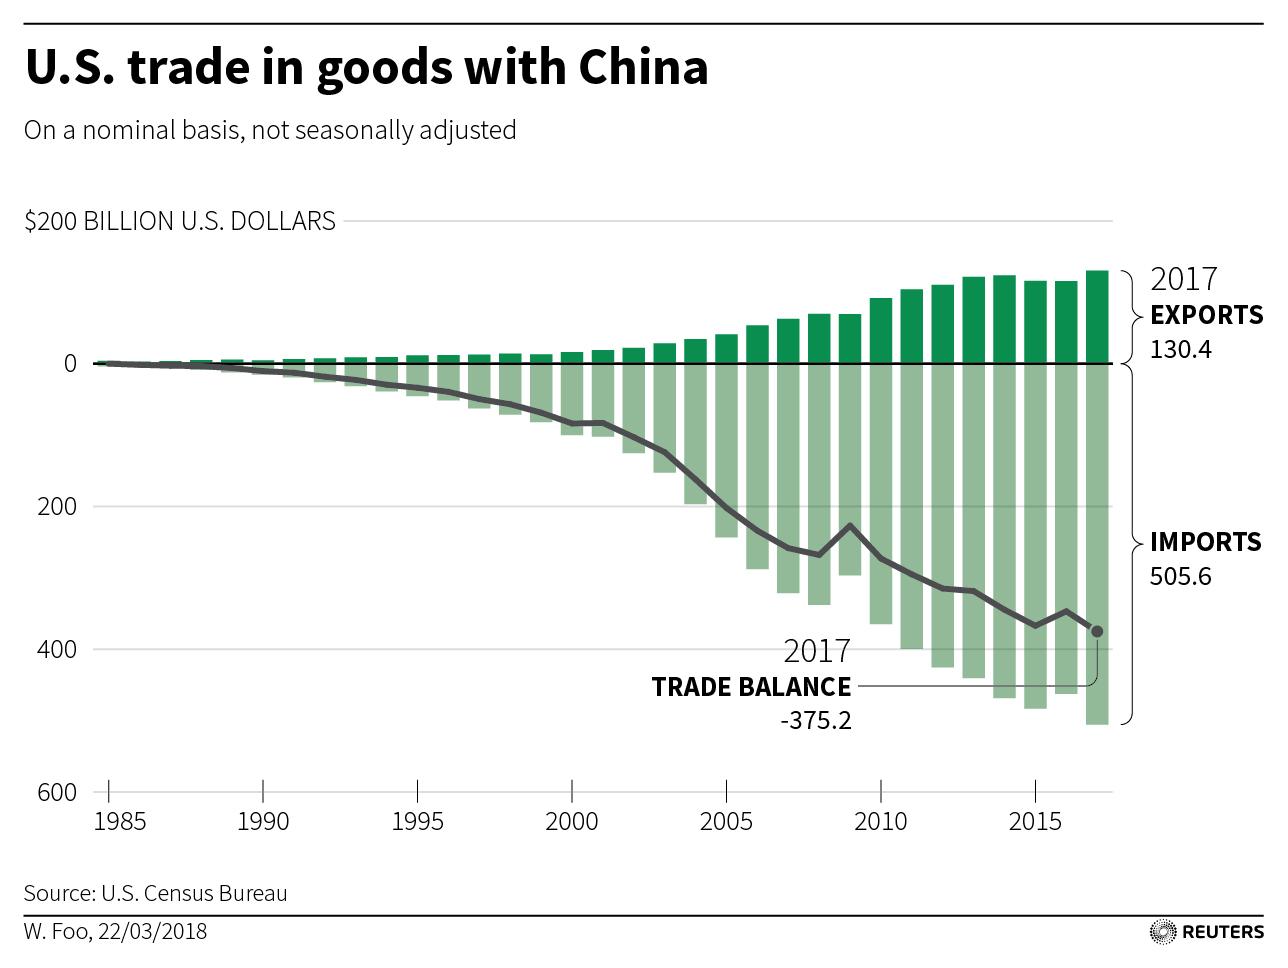 A chart showing the US trade in goods with China.